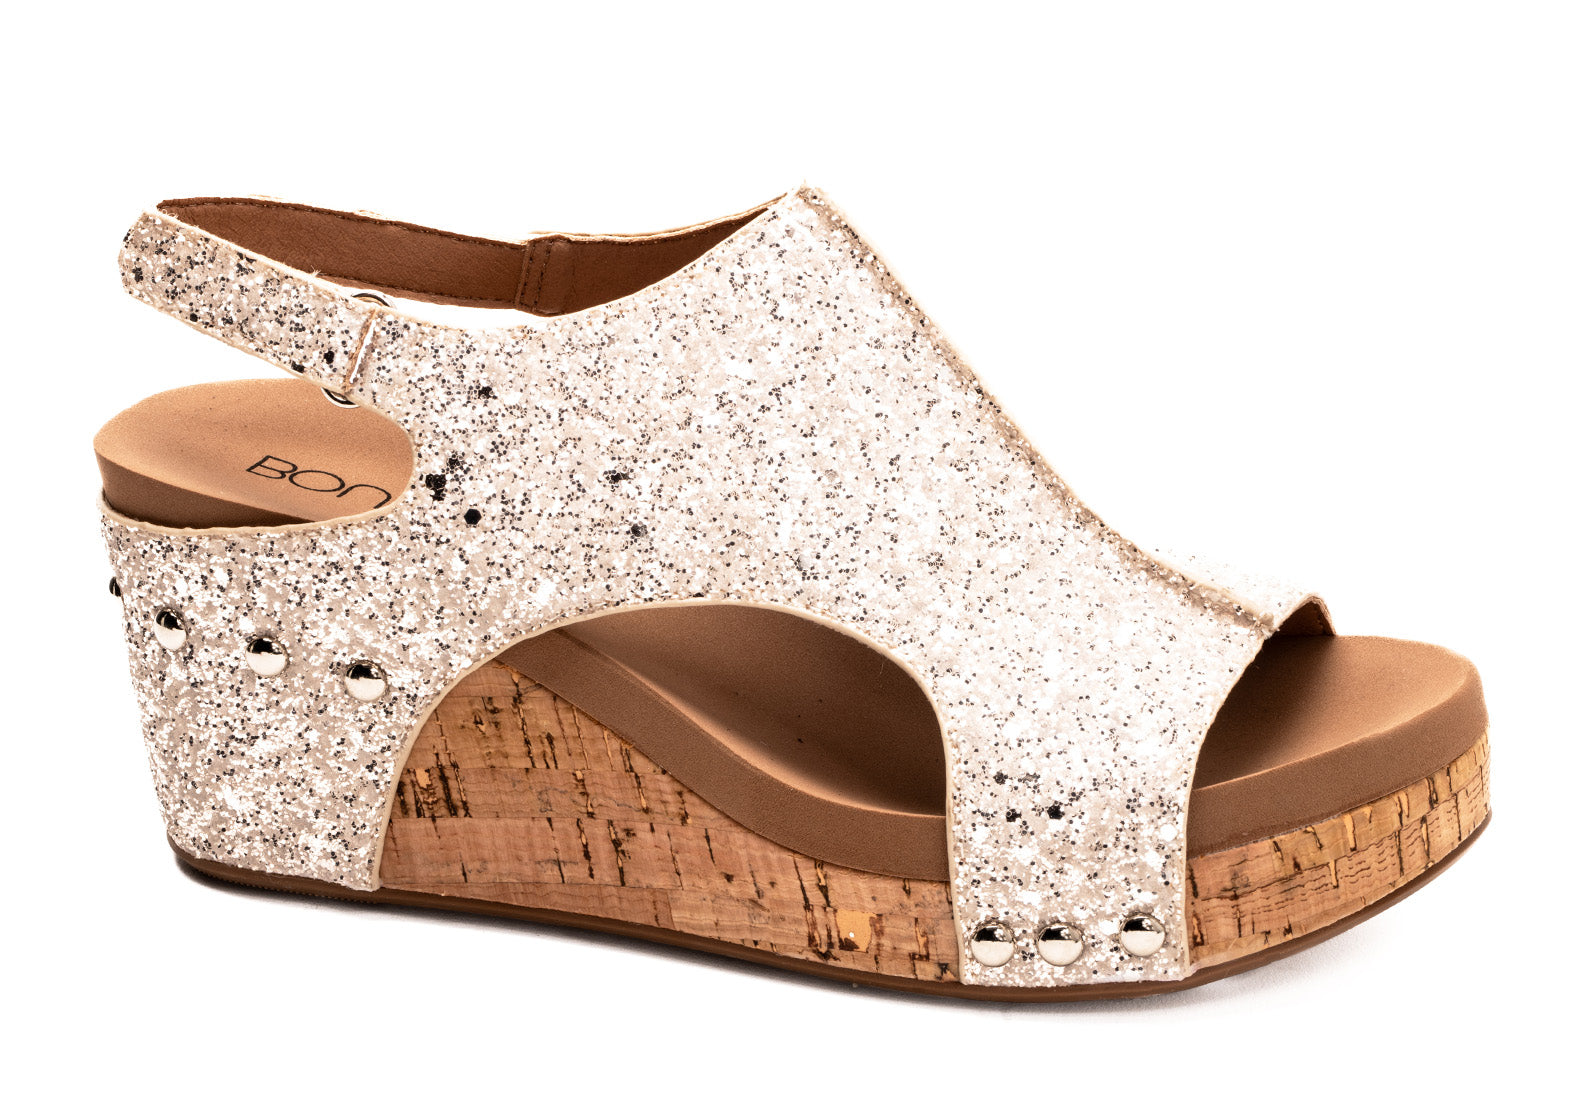 Carley Wedge by Corky’s